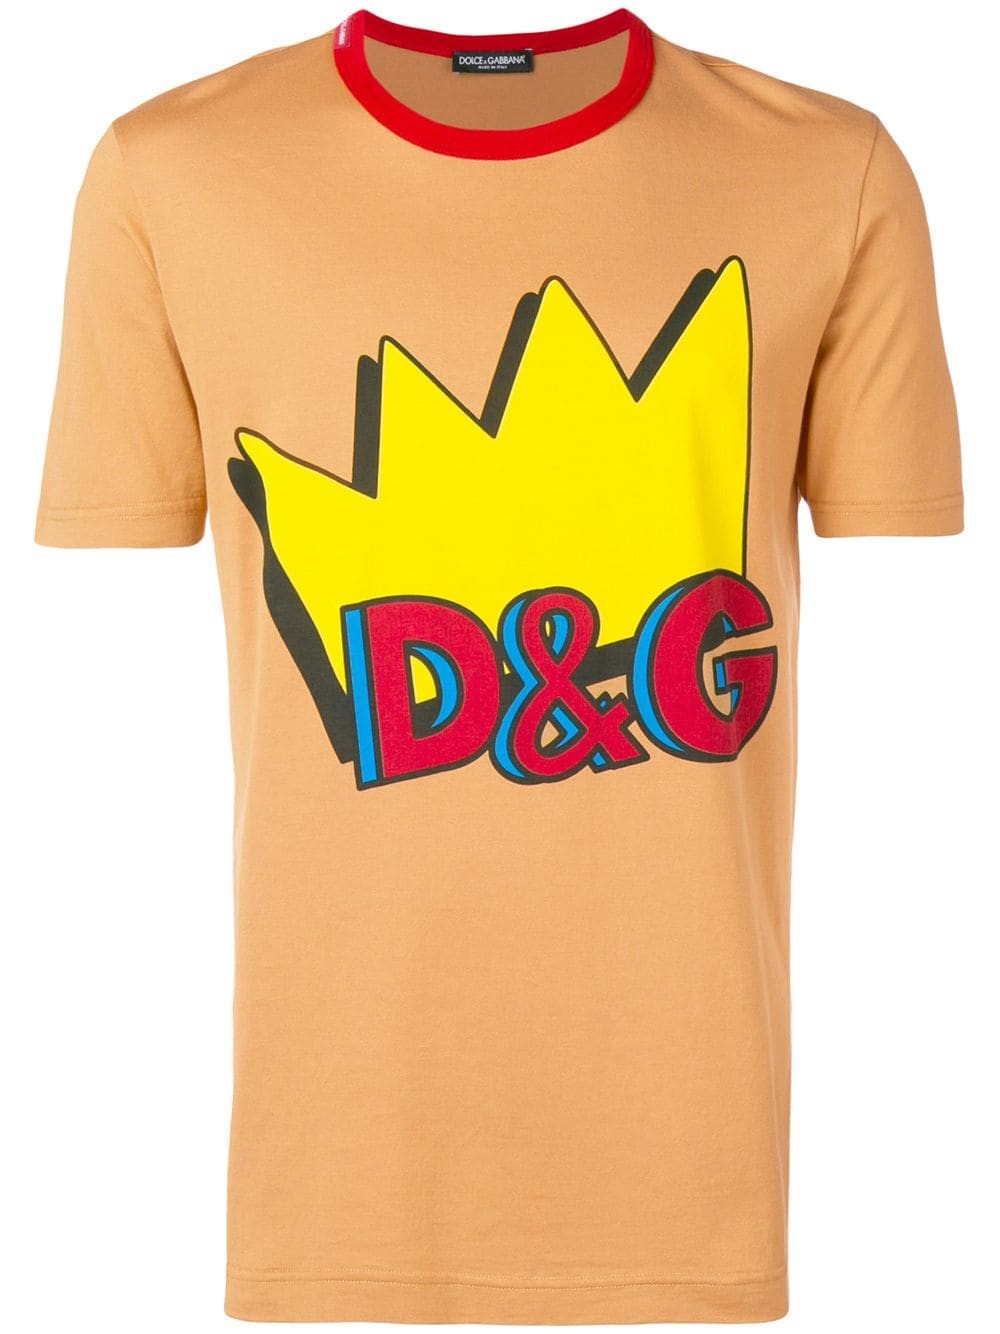 dolce & gabbana CROWN T-SHIRT available on montiboutique.com - 27483